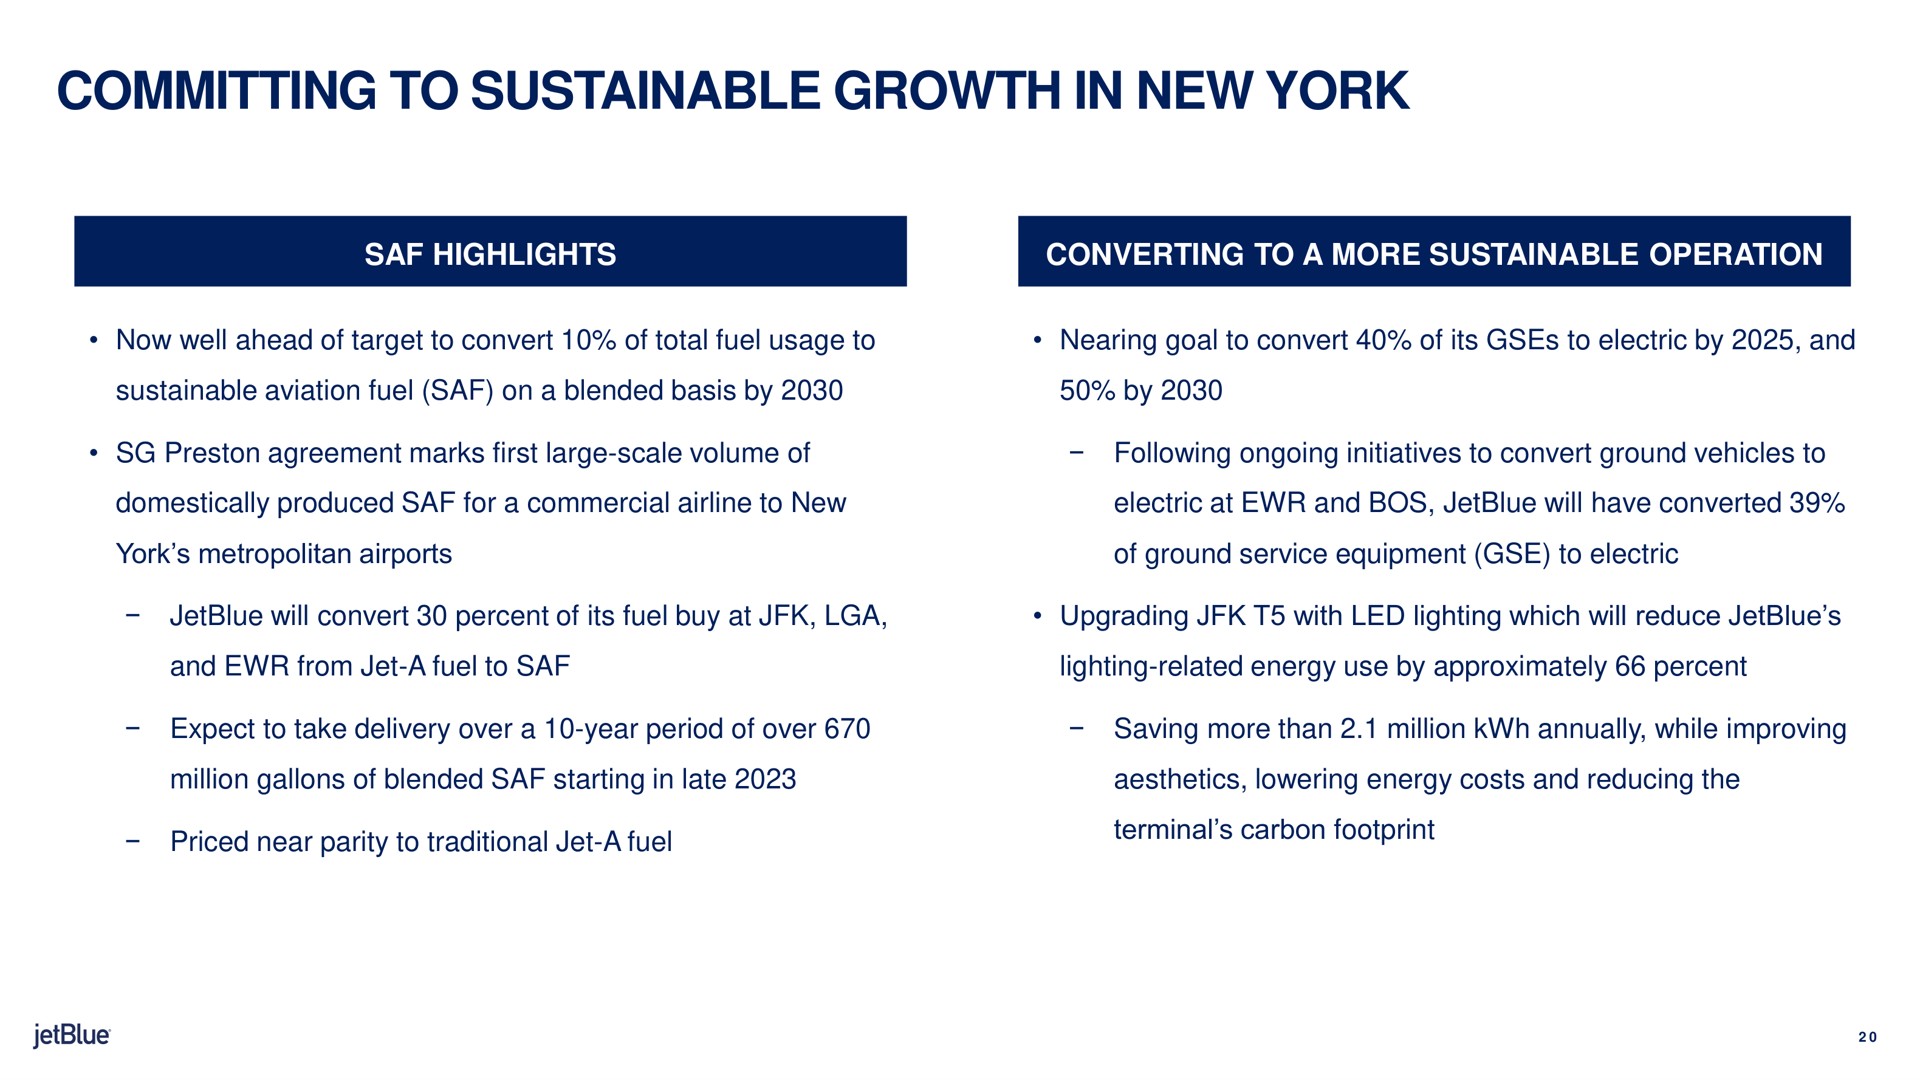 committing to sustainable growth in new york priced near parity traditional jet a fuel terminal carbon footprint | jetBlue